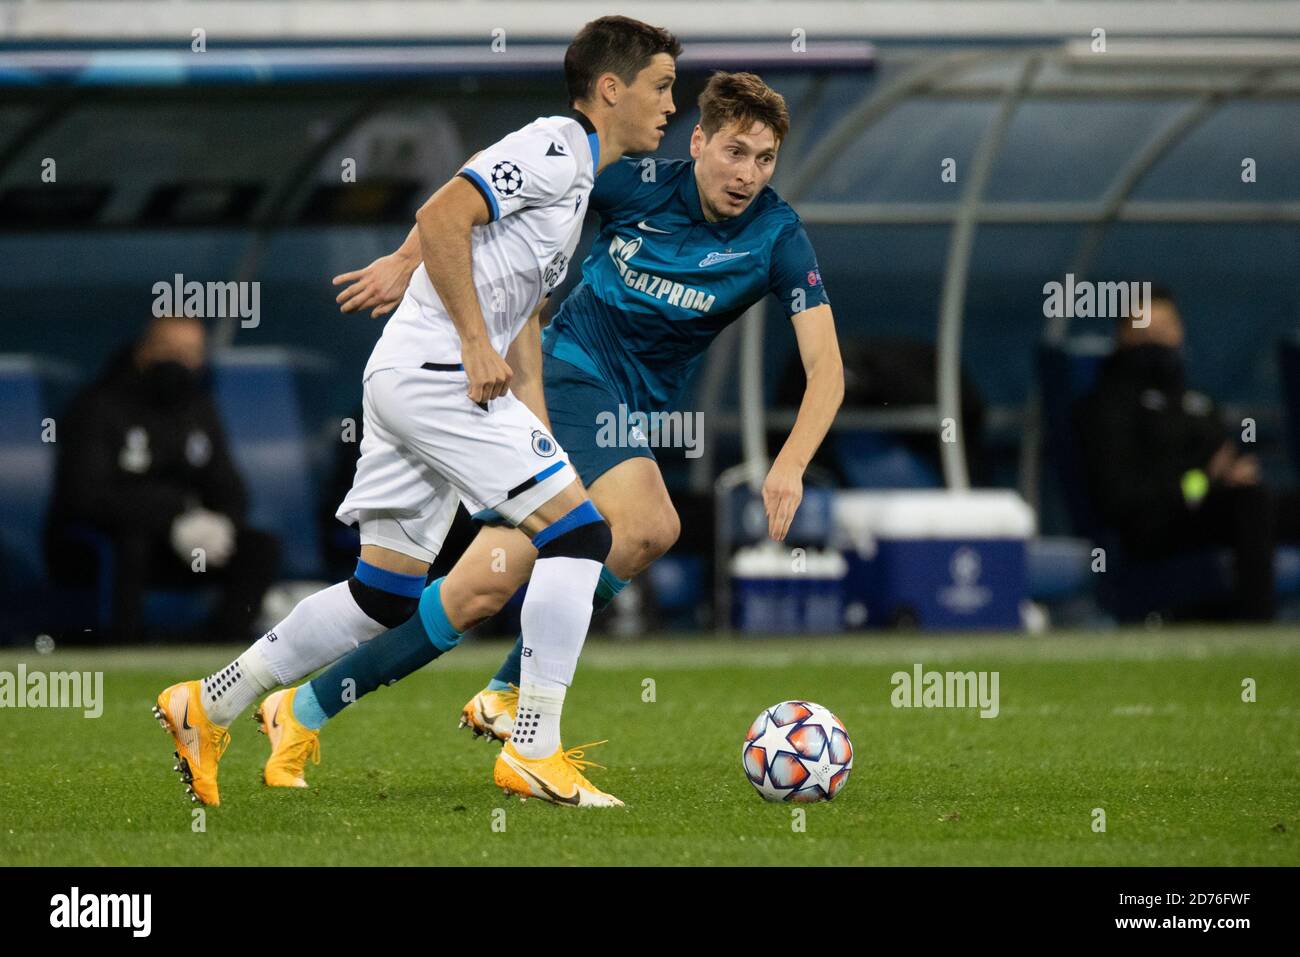 SAINT-PETERSBURG, RUSSIA - OCTOBER 20: Daler Kuzyayev of Zenit St Petersburg during the UEFA Champions League Group F match between Zenit St Petersburg and Club Brugge KV at Gazprom Arena on October 20, 2020 in Saint-Petersburg, Russia [Photo by MB Media] Stock Photo